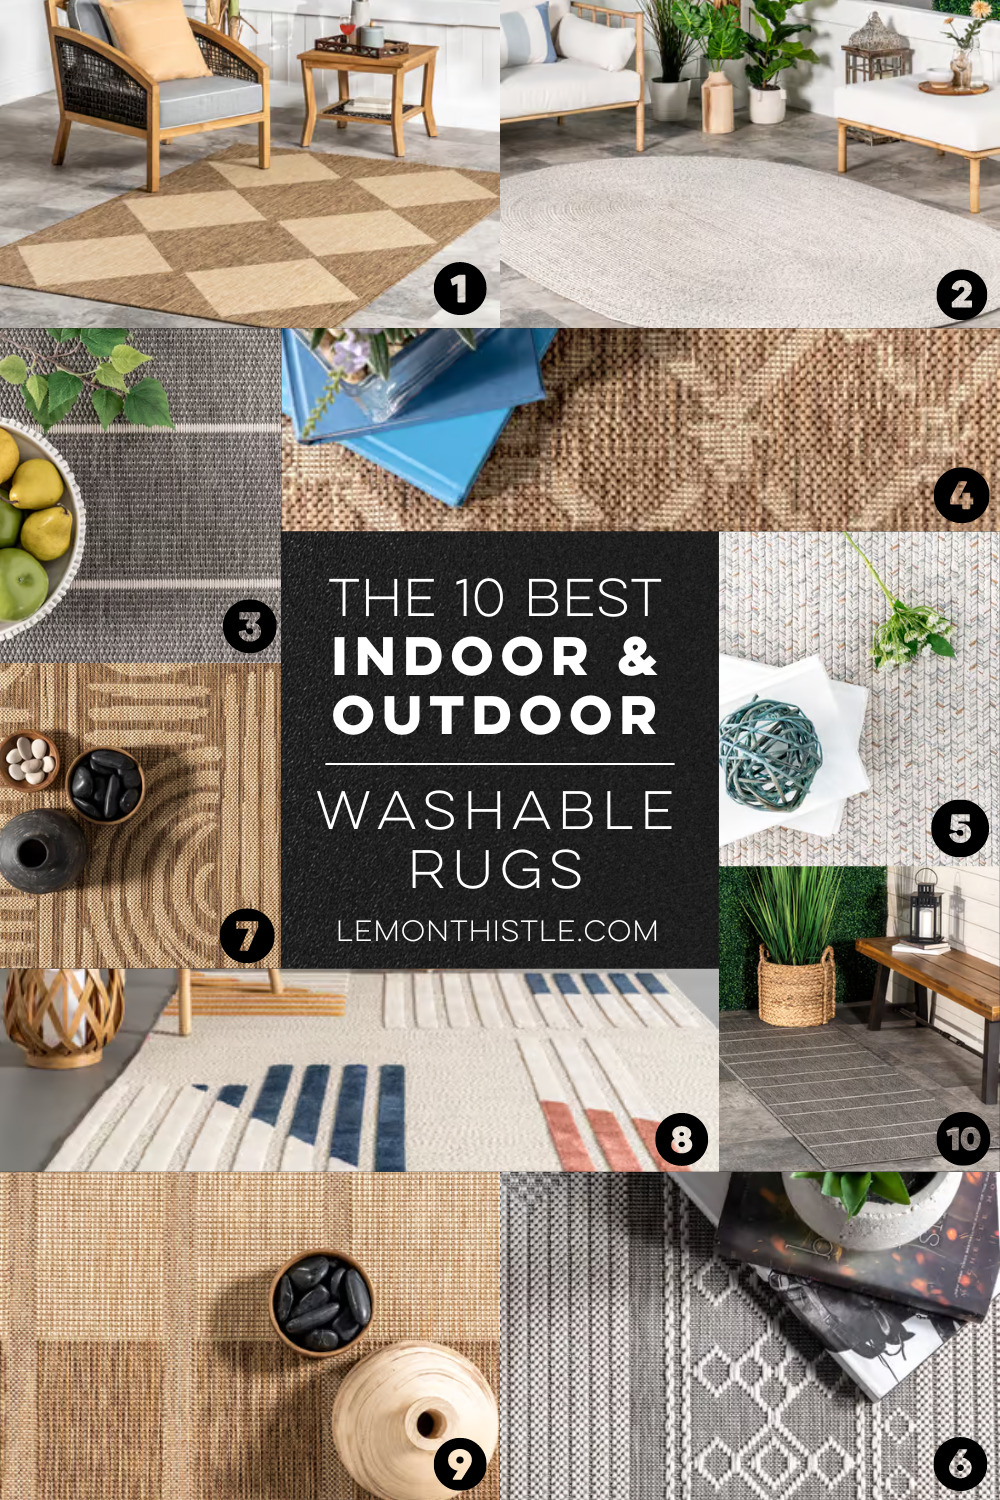 An outdoor washable rug can make a difference in your space. Here the 10 best.